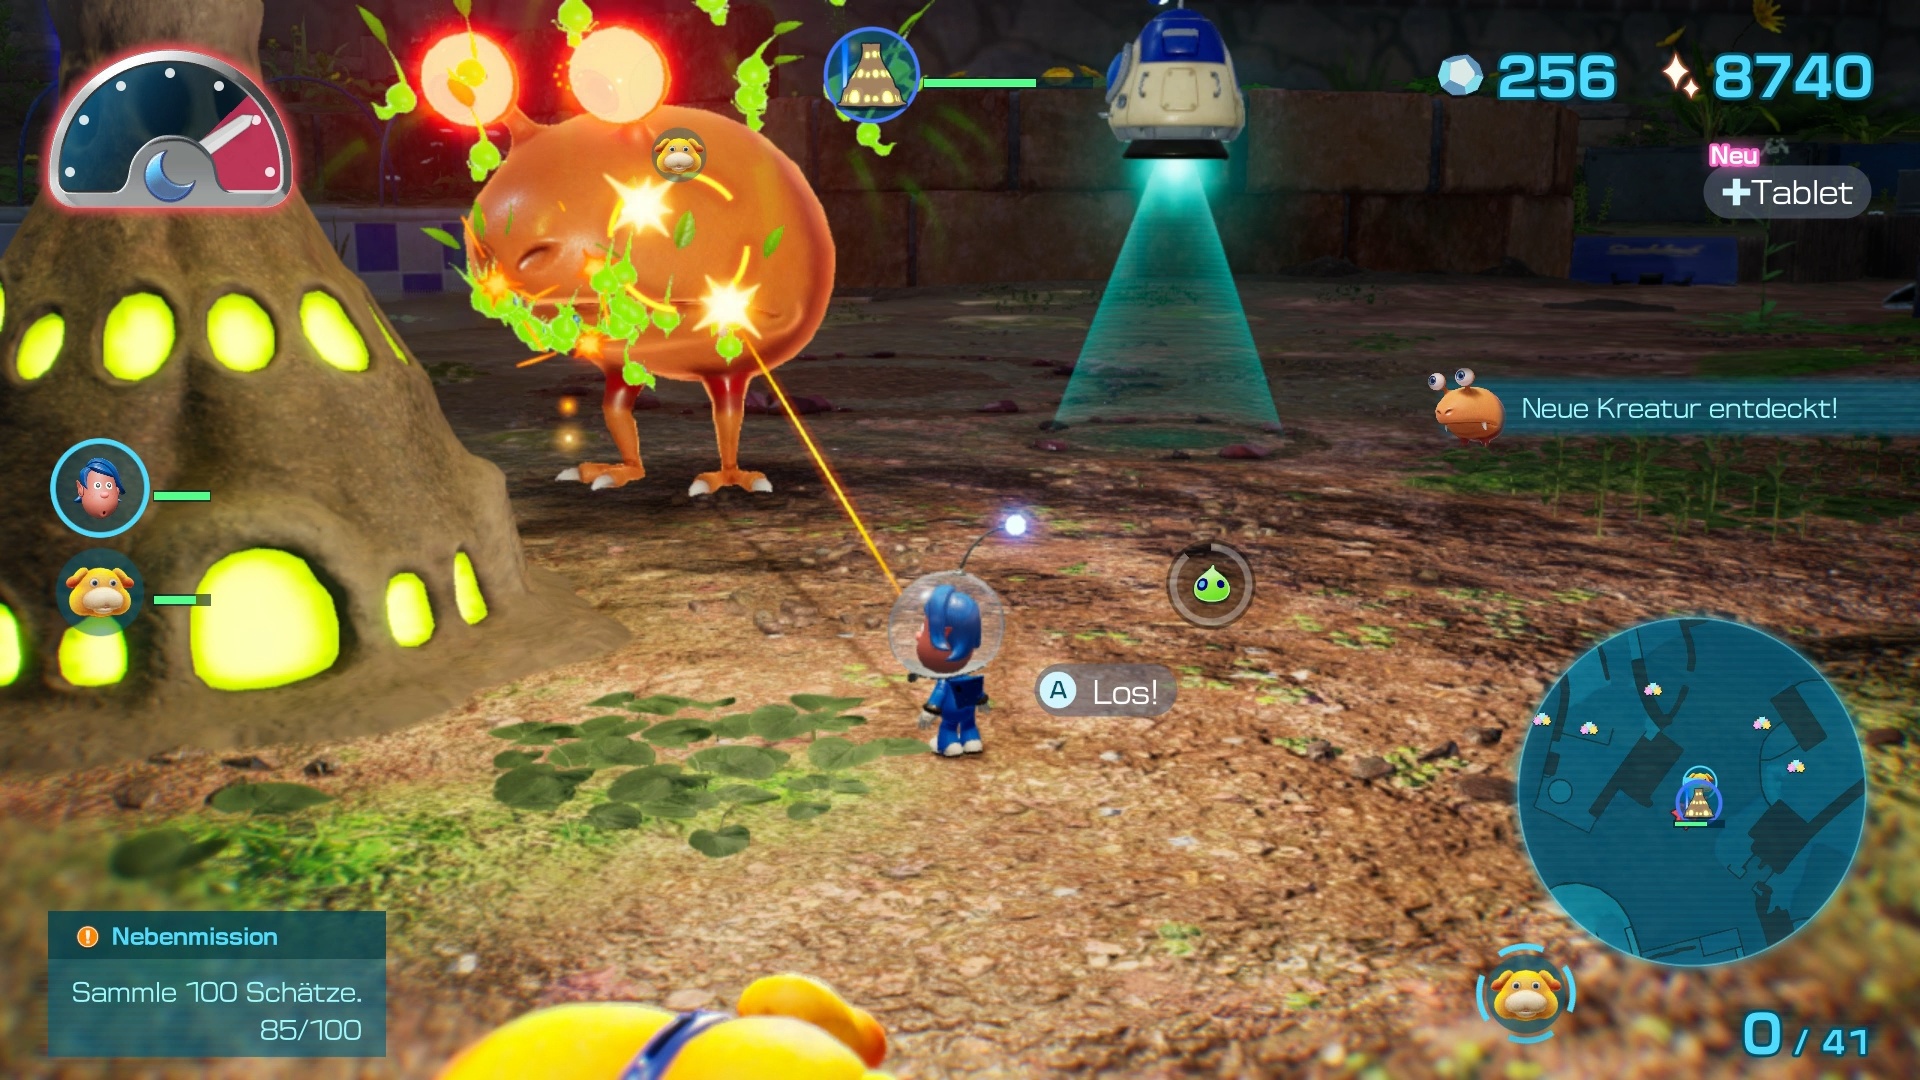 (In night missions you have to defend light buildings (left) against monster waves. This is helped by the new green glow pikmin, which blind enemies briefly with a kind of flashbang).